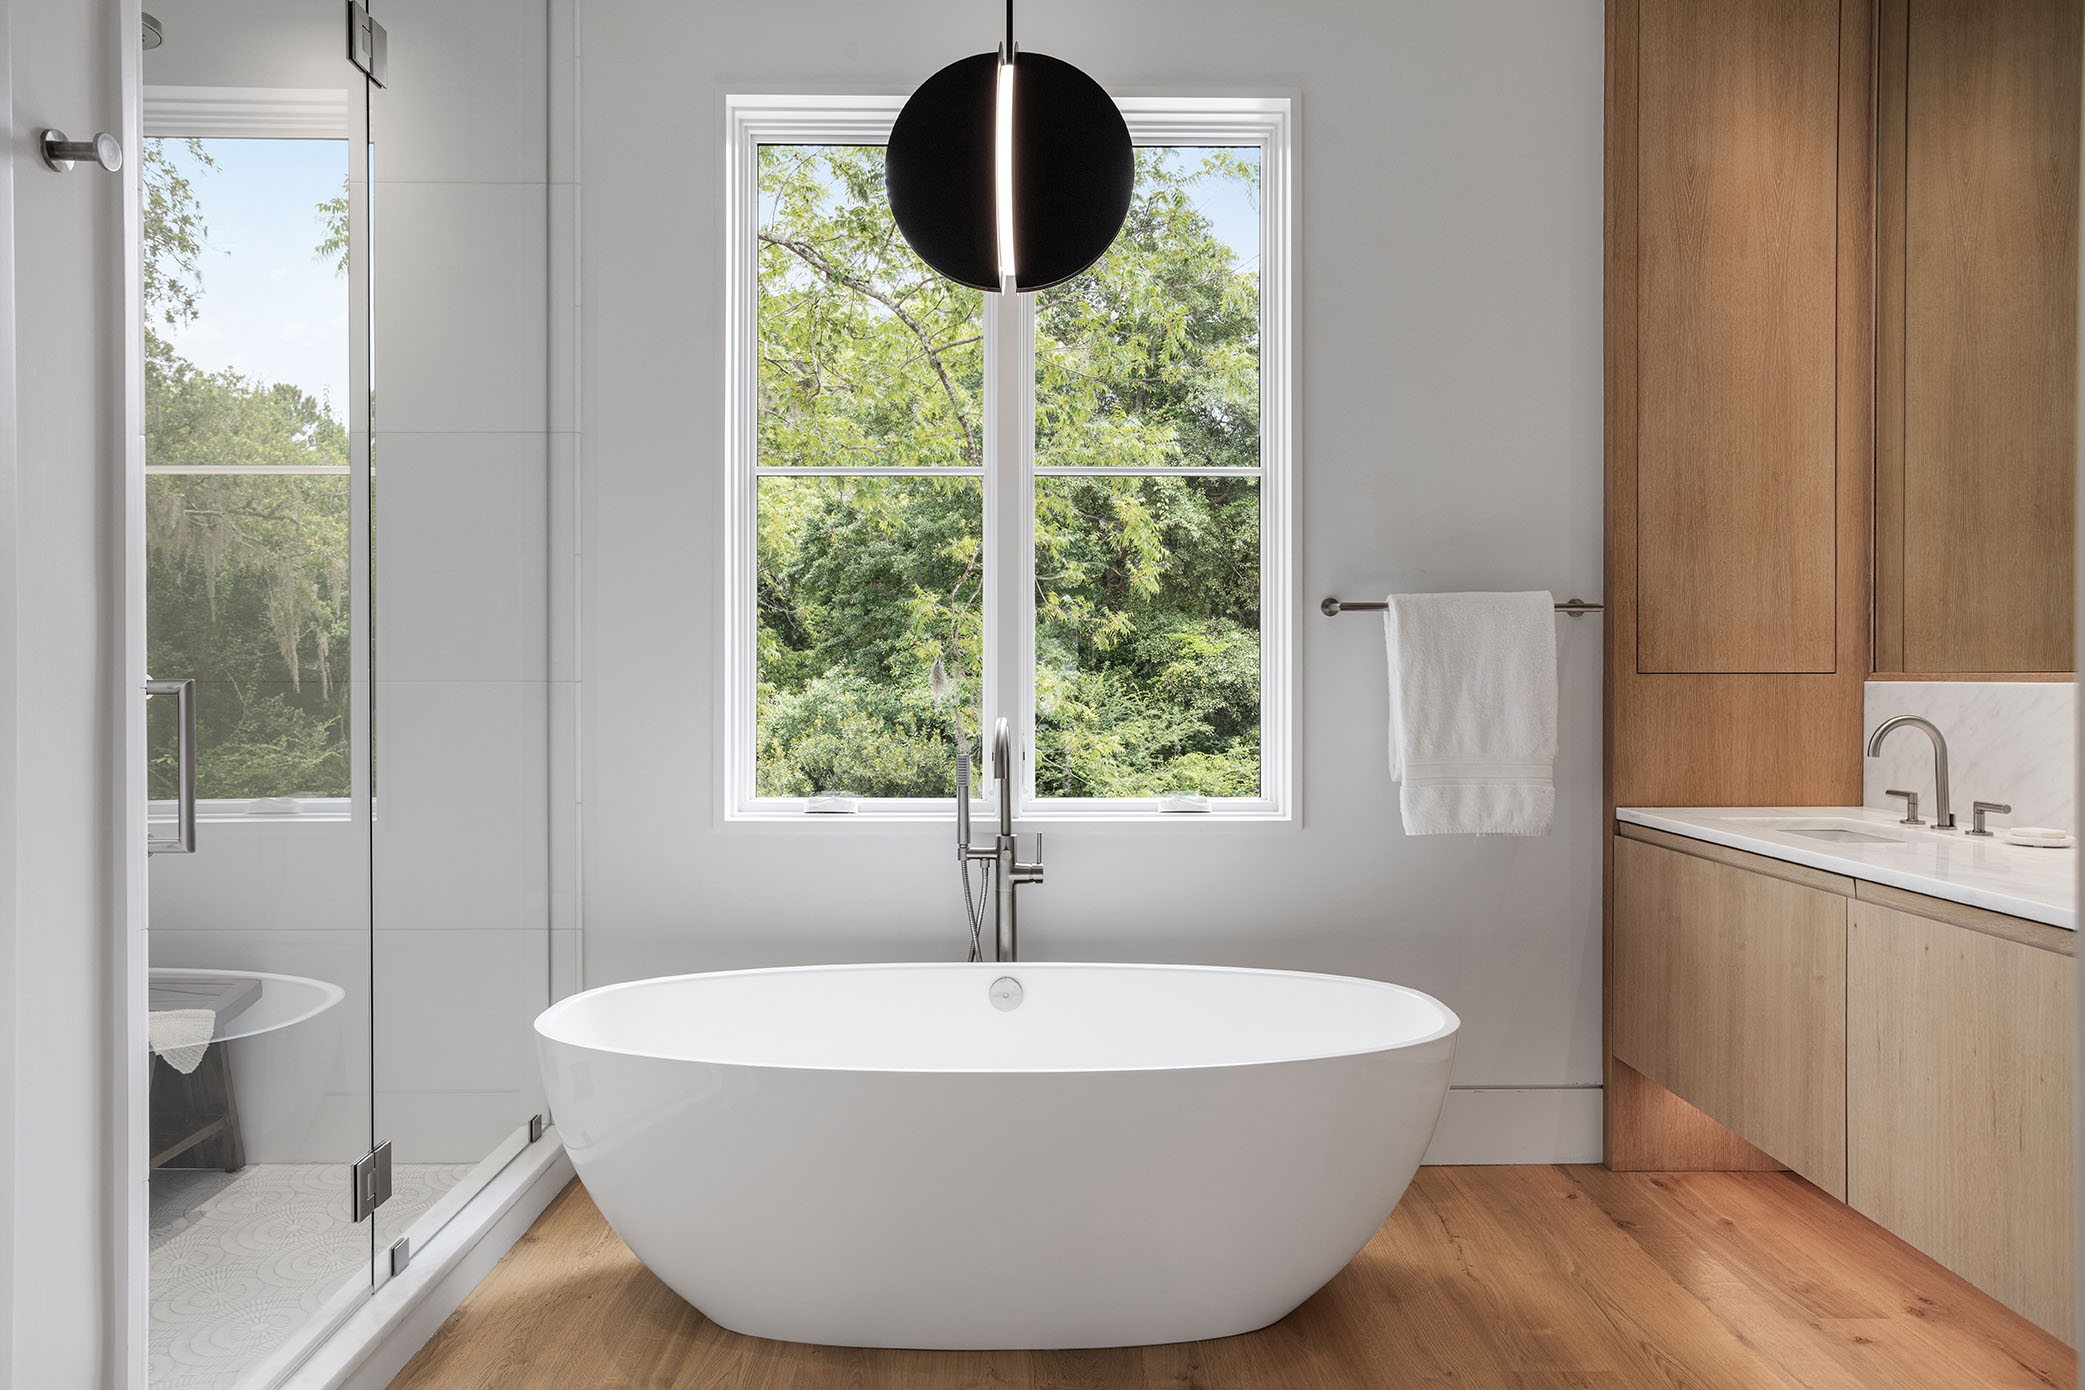 In the adjoining bath, a soaker tub is topped by a black pendant light from Visual Comfort.